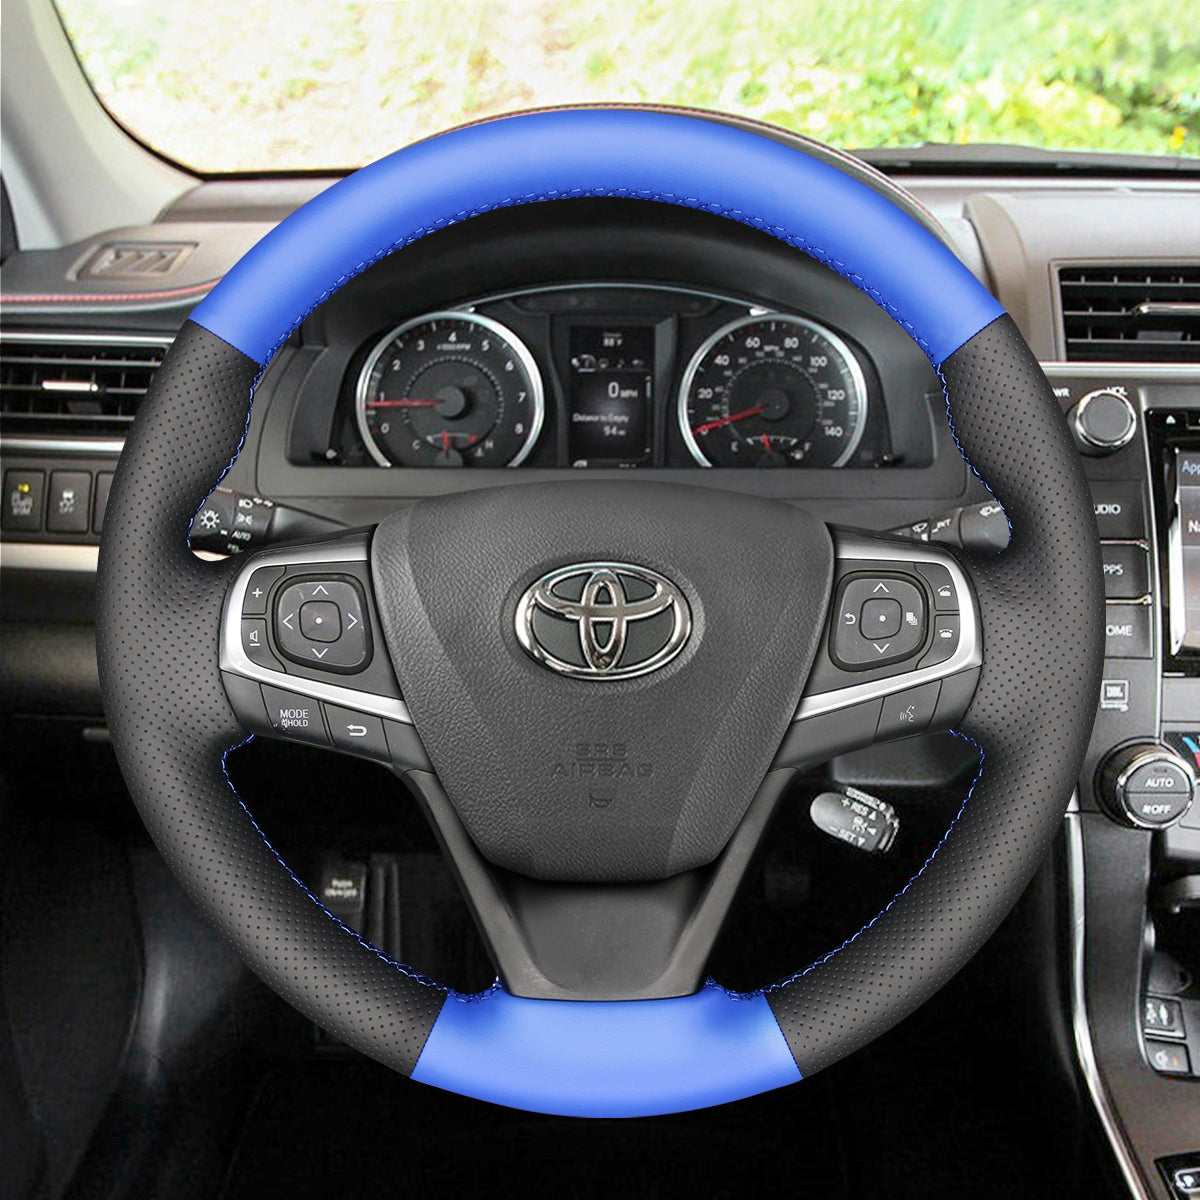 MEWANT Hand Stitch Leather Car Steering Wheel Cover for Toyota Avensis 2015-2019 / Camry 2015-2017 / Avalon 2013-2018 / Harrier 2013-2020